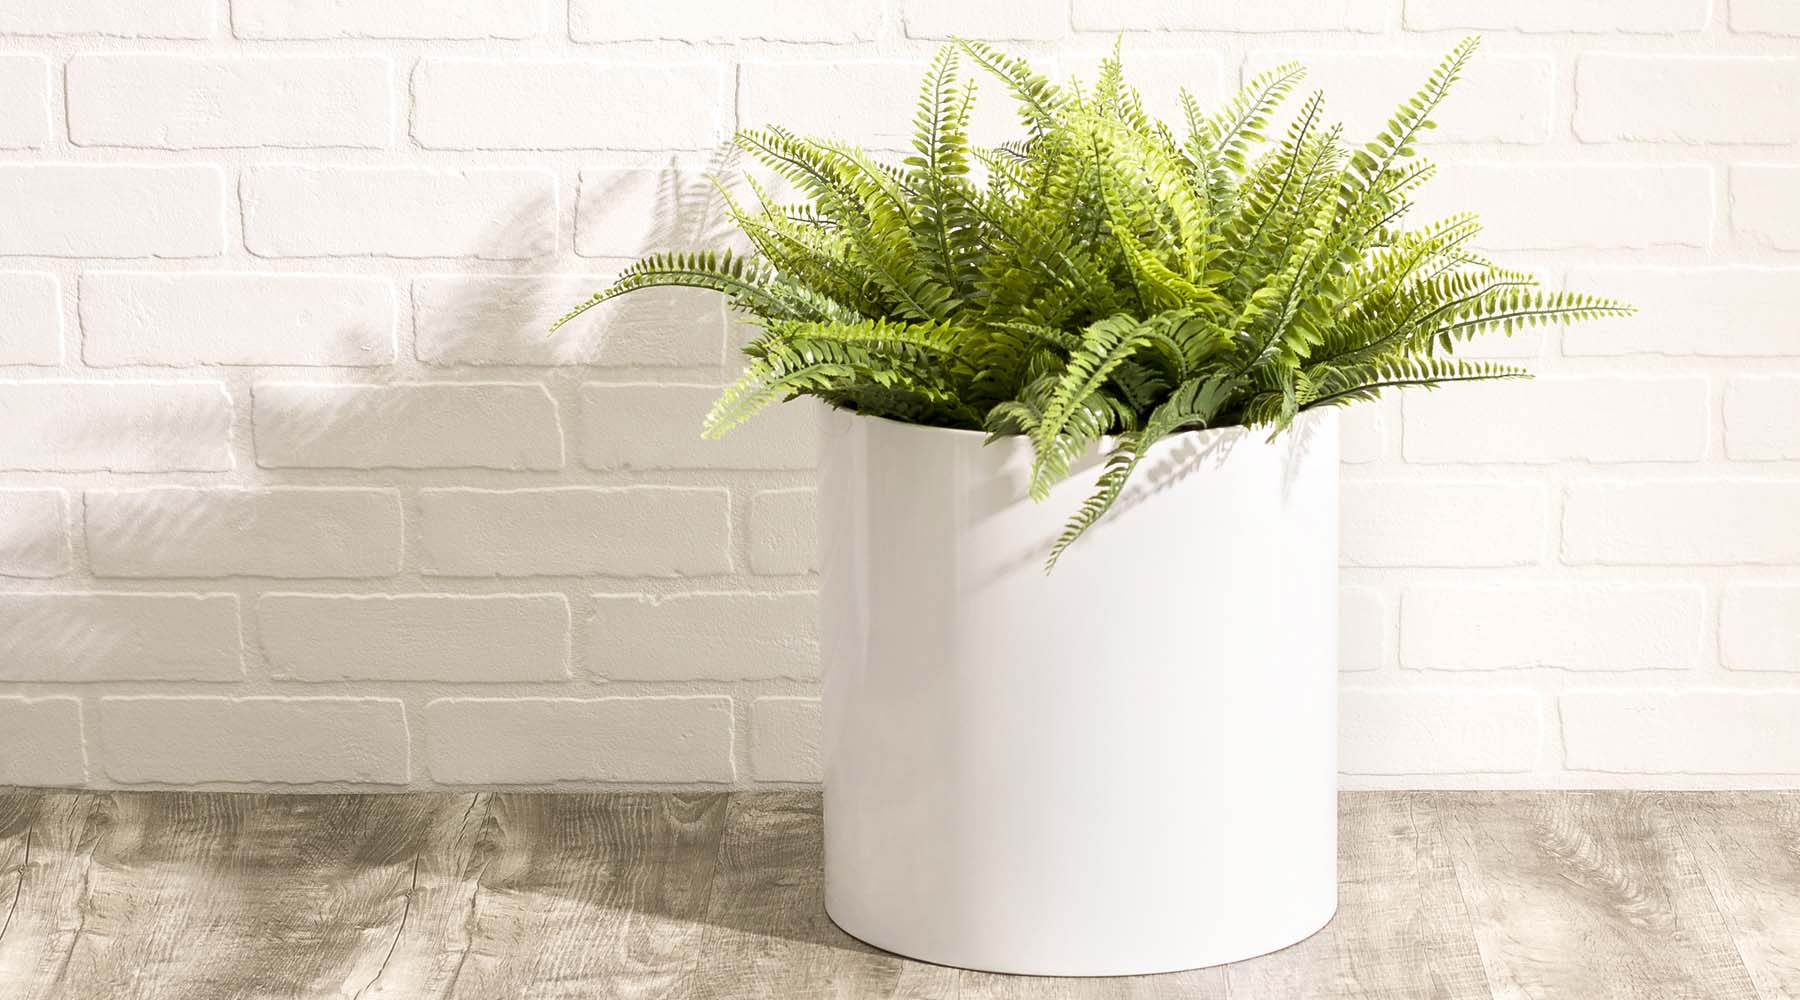 Office Planters. Modern and Contemporary Office Planter Pots and Boxes. Indoor Office Space, Reception, Cubicle, Office Dividers, Desk Planter, Large Office Planter Pot. Optional Drainage.